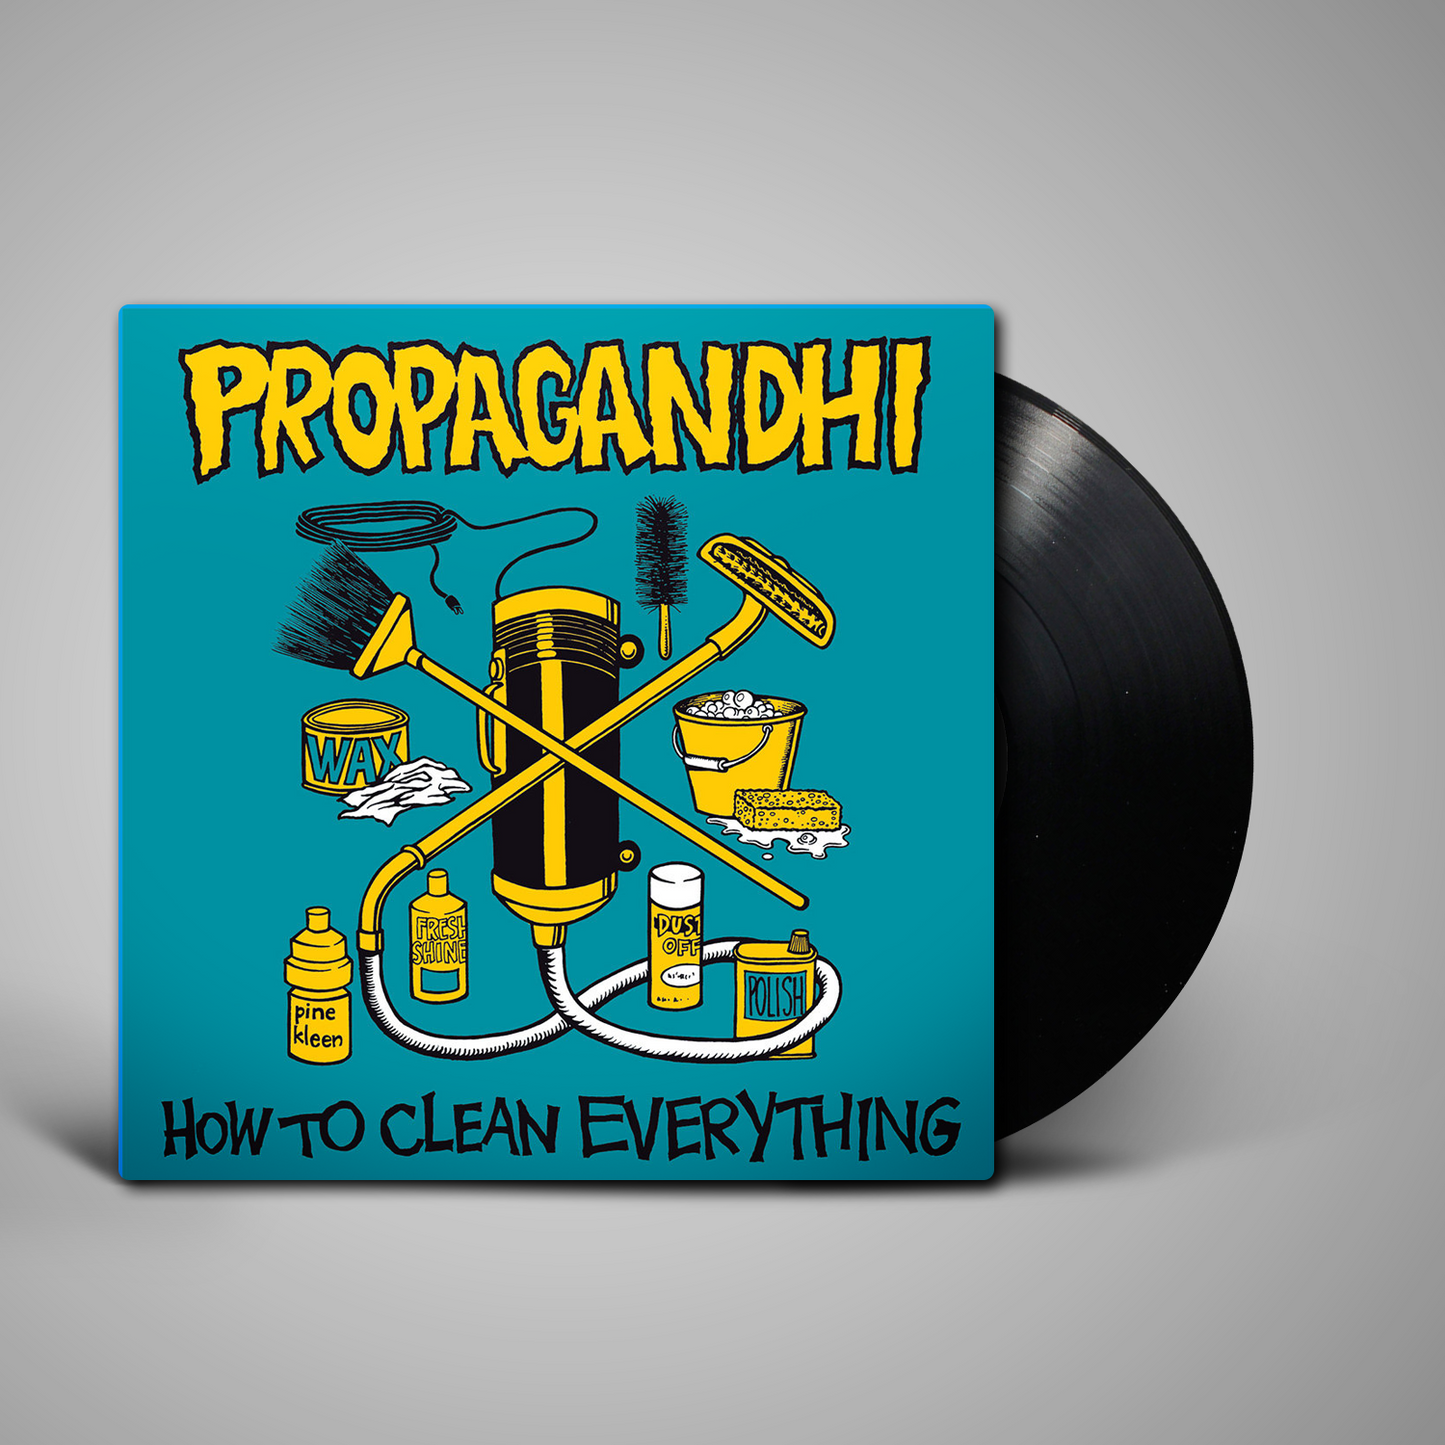 Propagandhi - How To Clean Everything: 20th Anniversary Edition